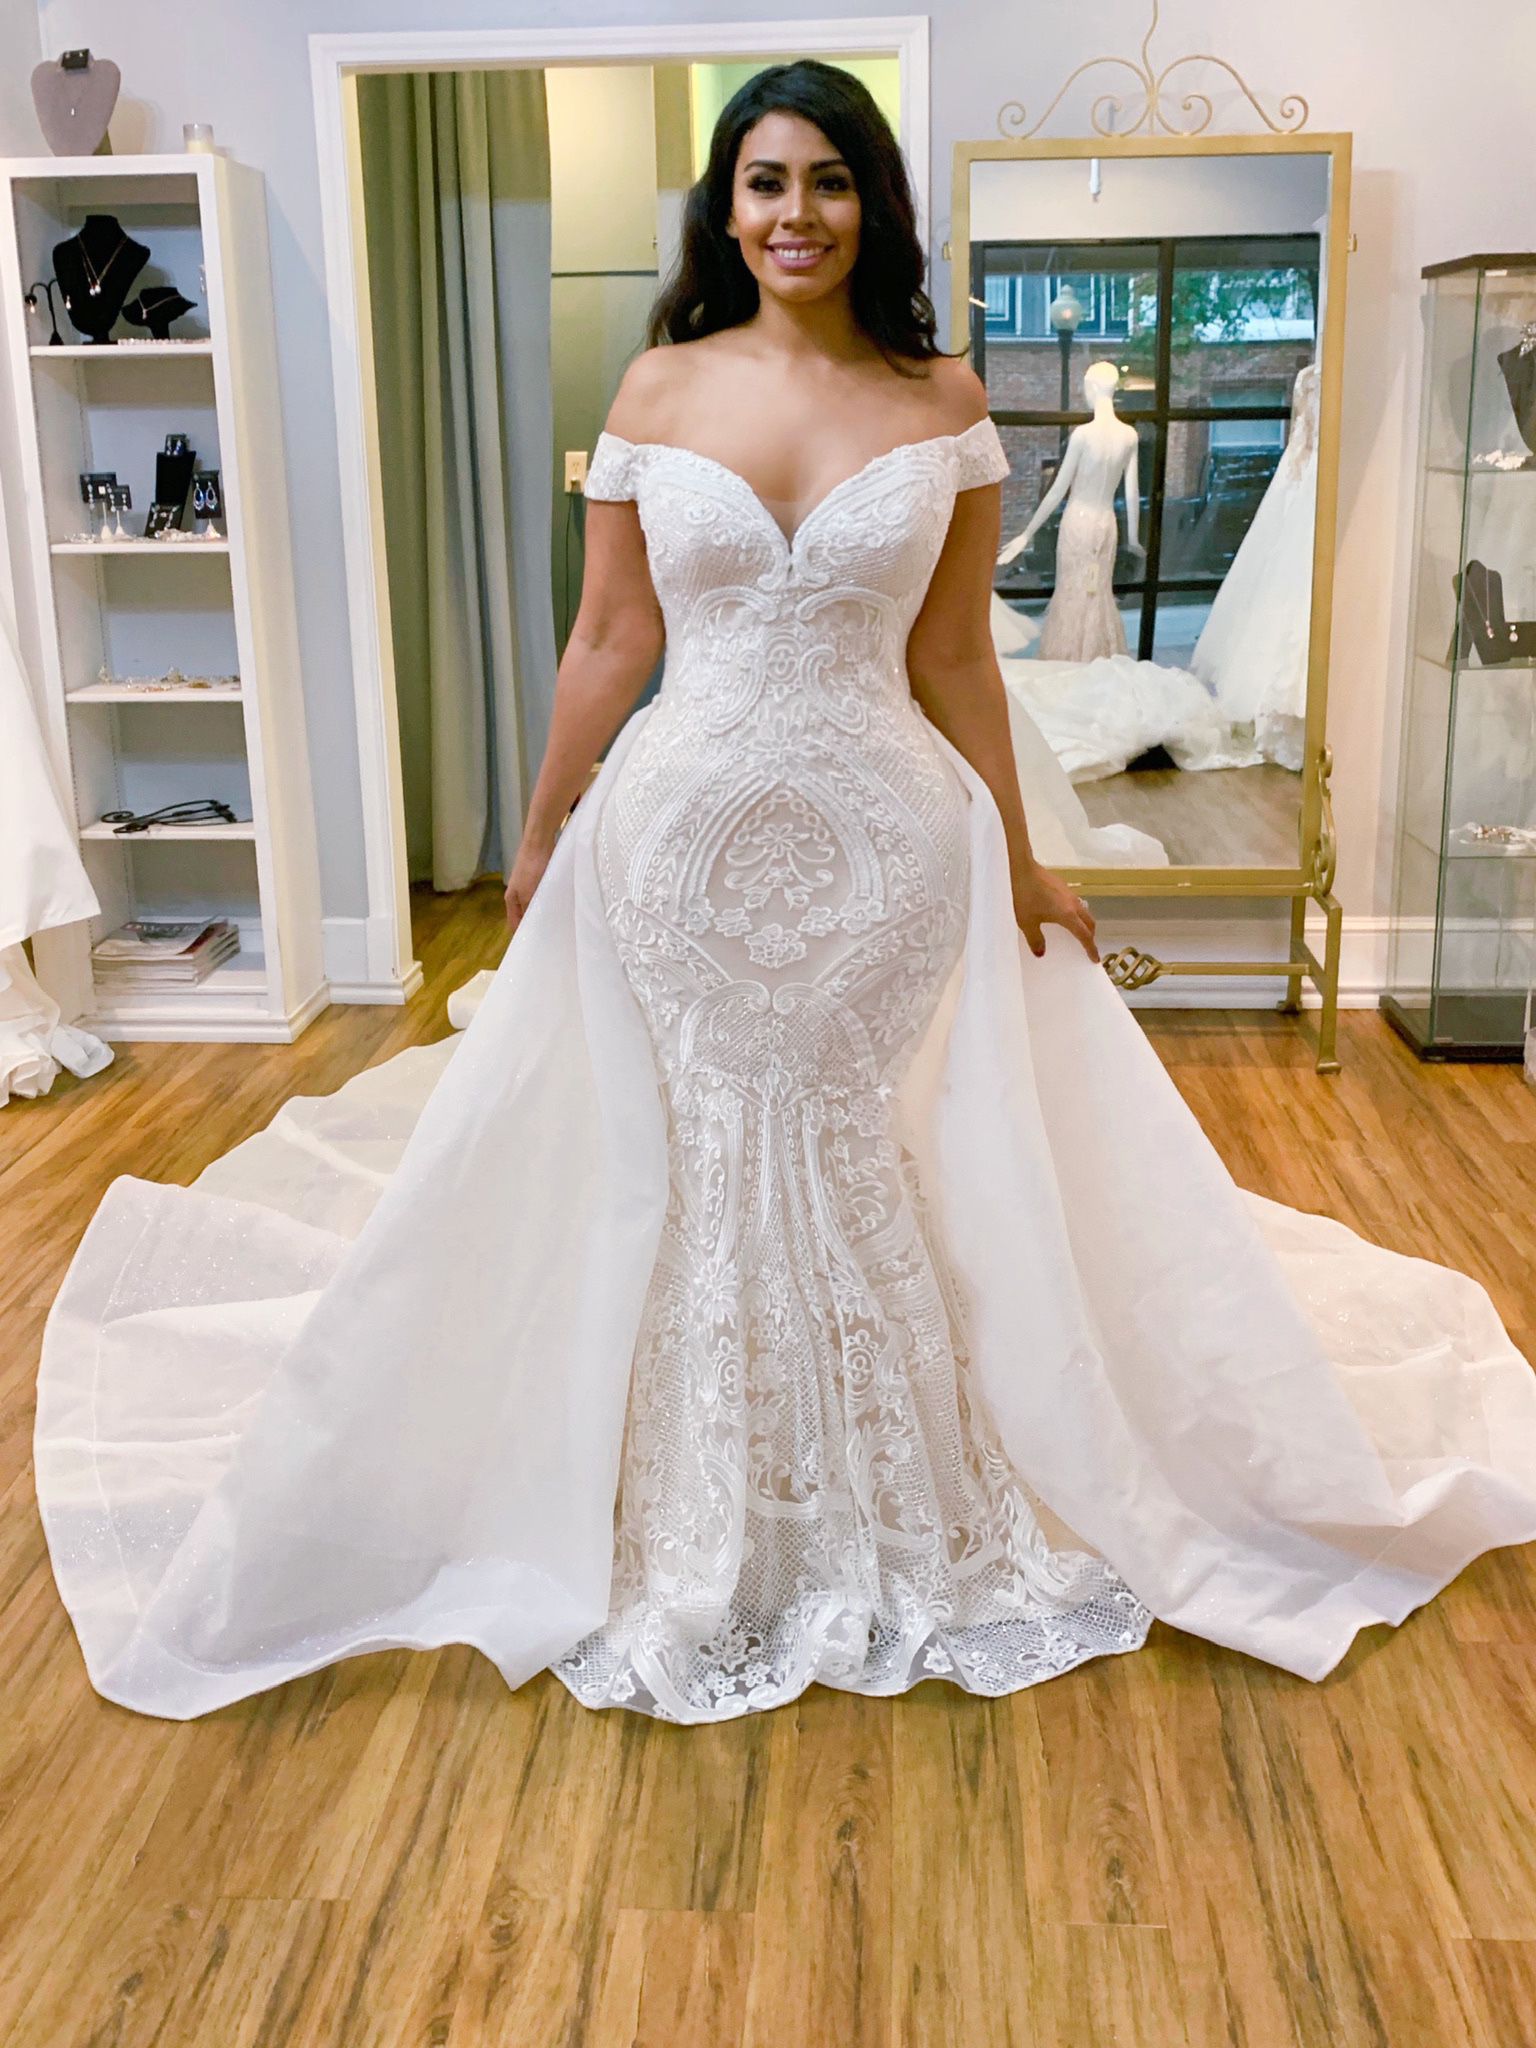 Wedding Dress New Size 18 - See Video For Details 